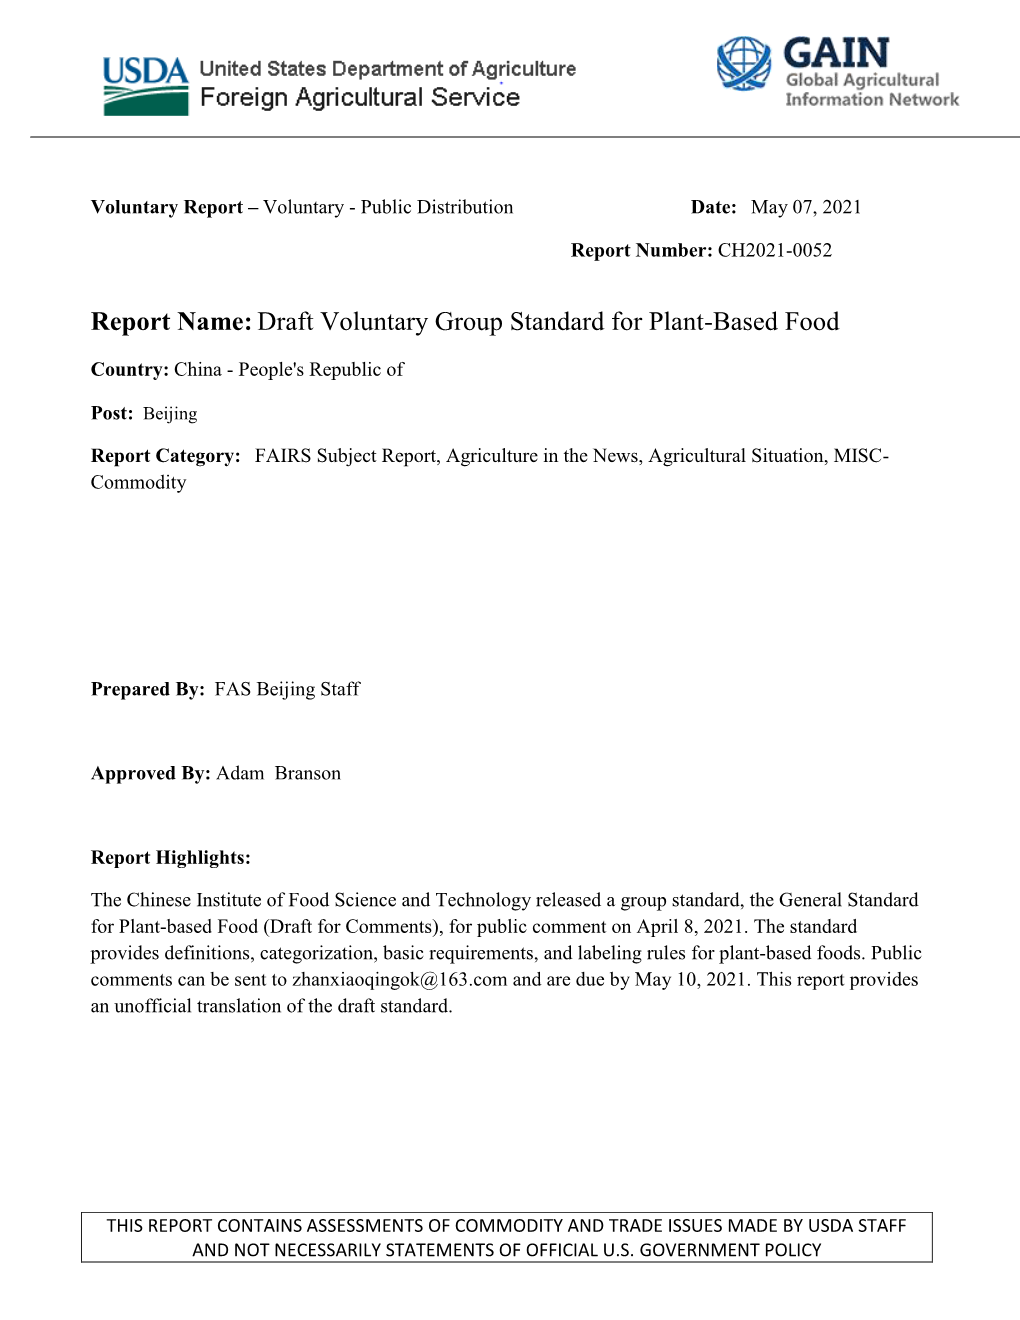 Report Name:Draft Voluntary Group Standard for Plant-Based Food